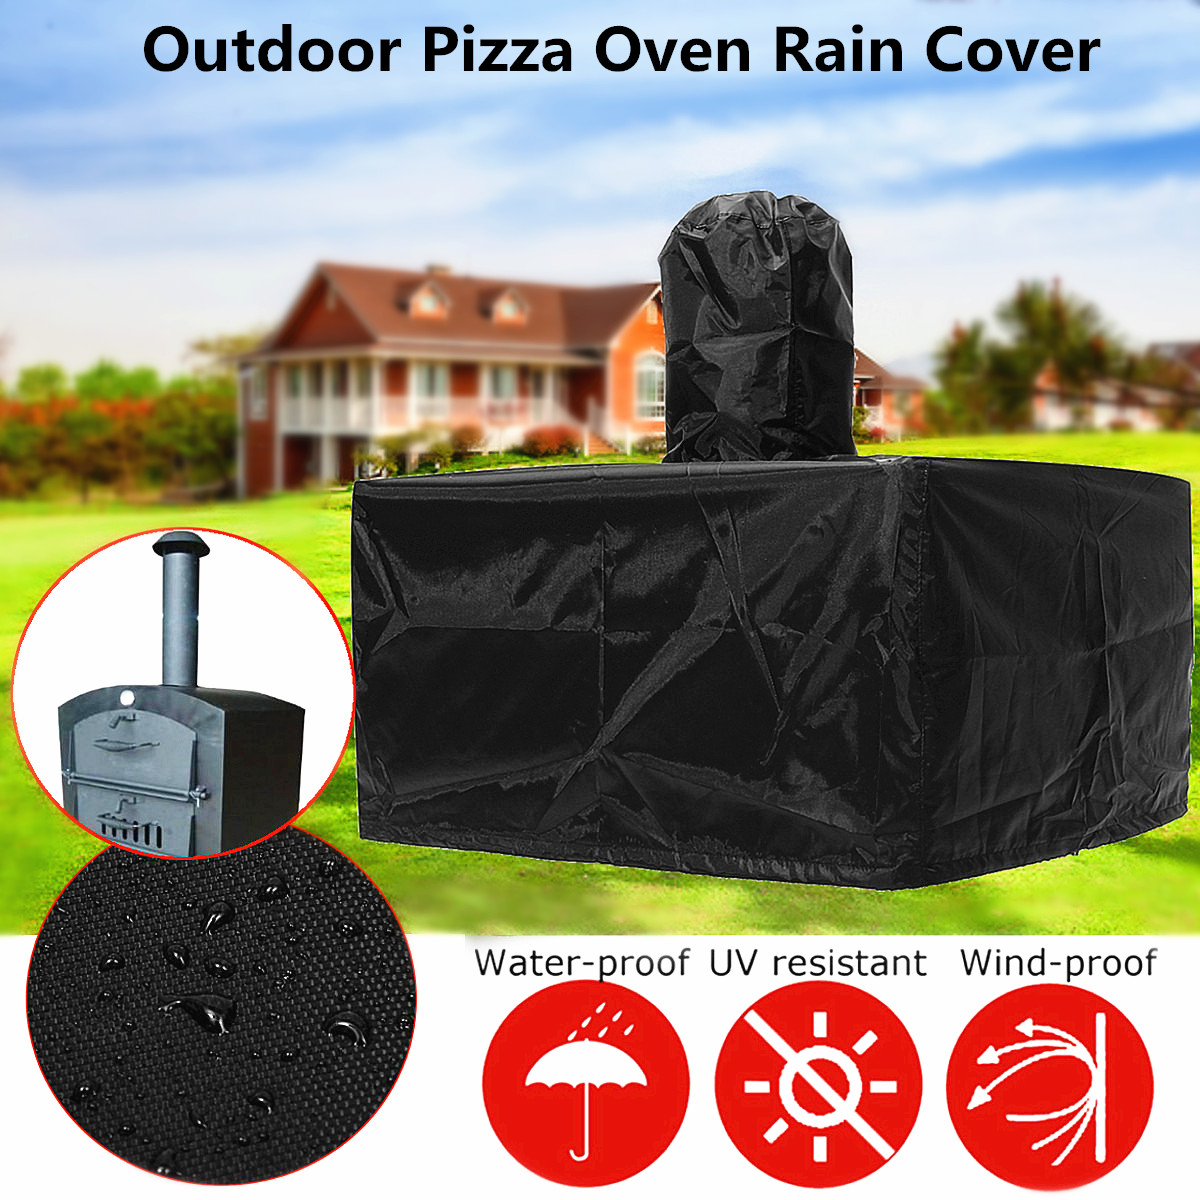 Outdoor-Pizza-Oven-Waterproof-Rain-Cover-BBQ-Charcoal-Fired-Bread-Oven-Smoker-Protector-1337984-1